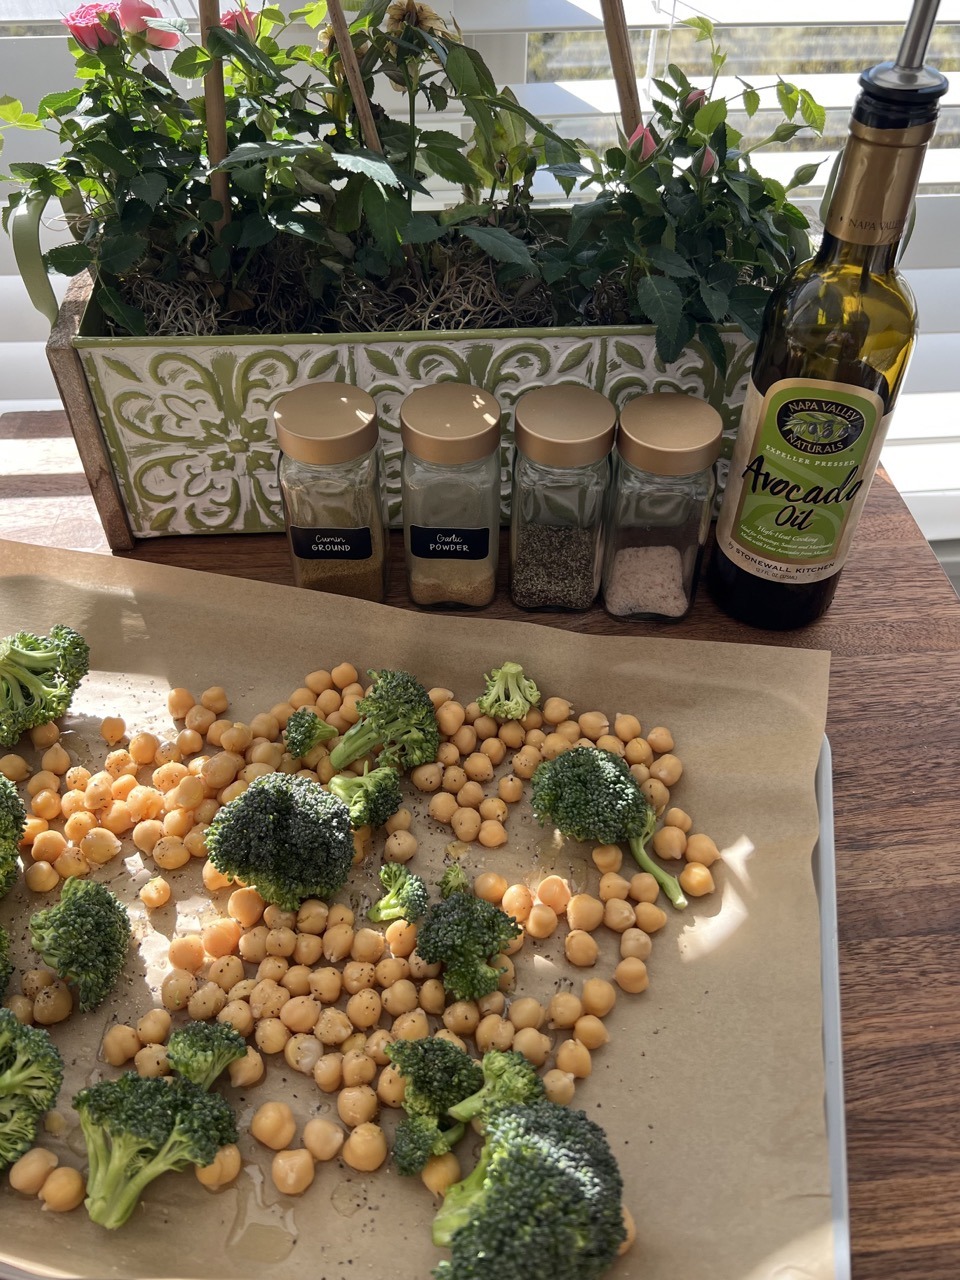 Preheat the oven to 400. Disperse the chickpeas and broccoli onto a baking sheet lined with parchment paper. Season them with salt and pepper, cumin, and garlic powder. Roast until crispy.